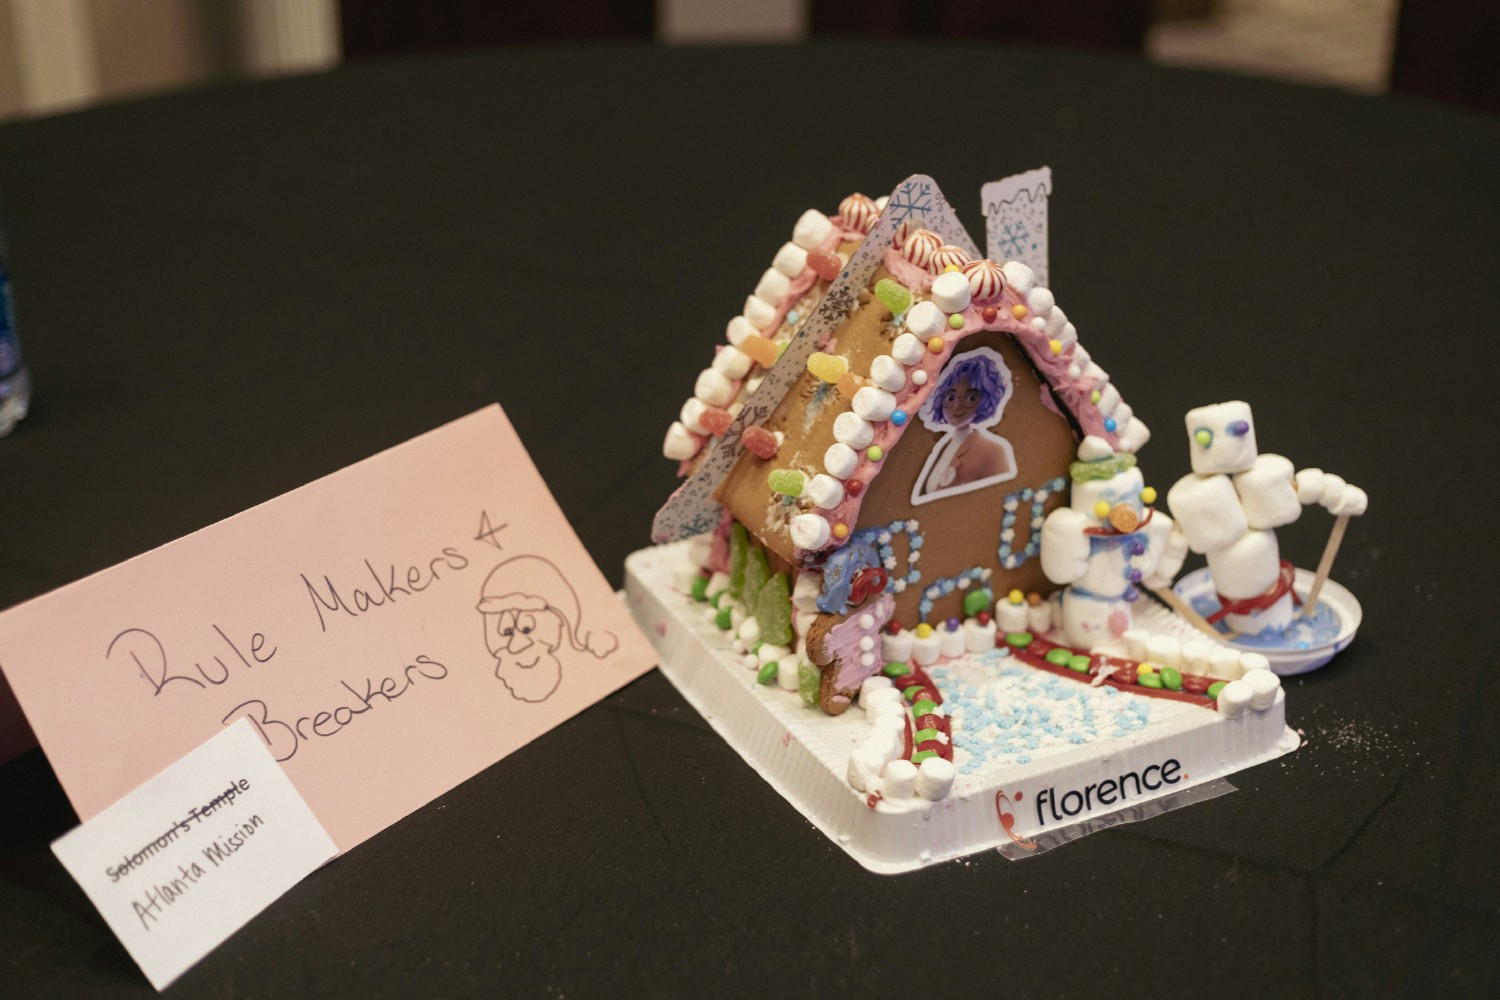 Teams gathered to build the best Gingerbread House. Winners chose a nonprofit org in which Florence donated to!